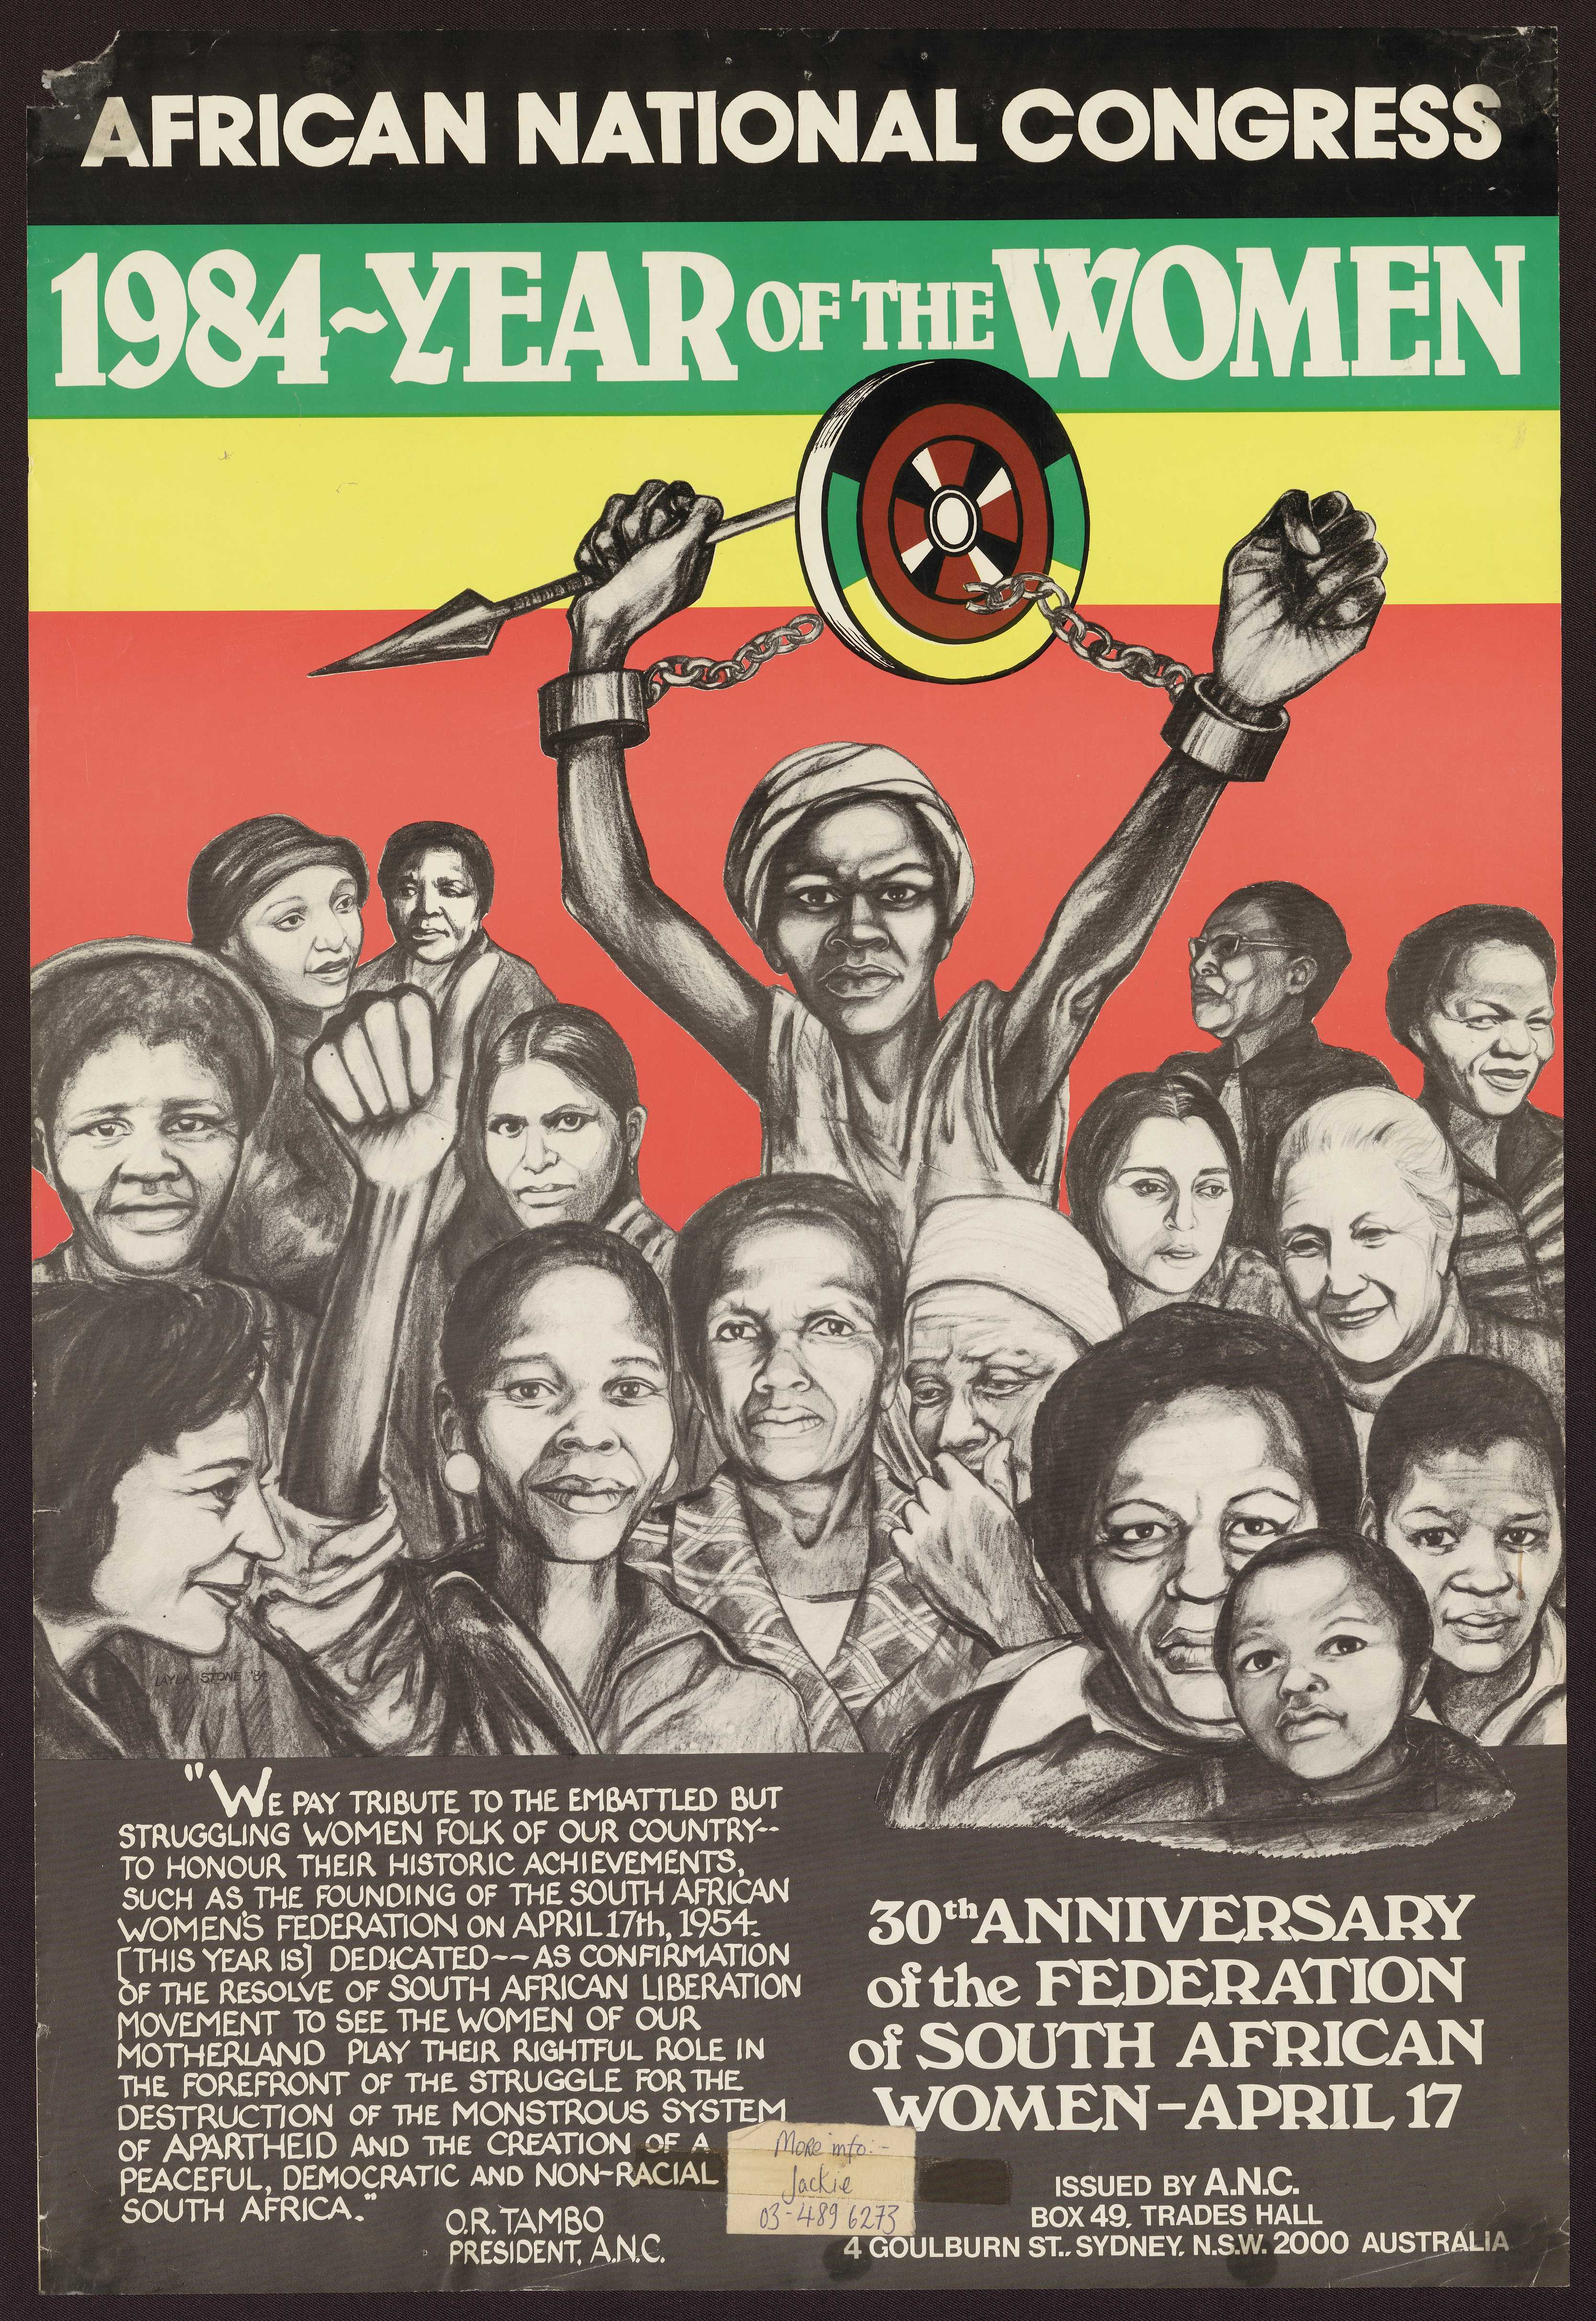 [African National Congress 1984 Year of the Women]